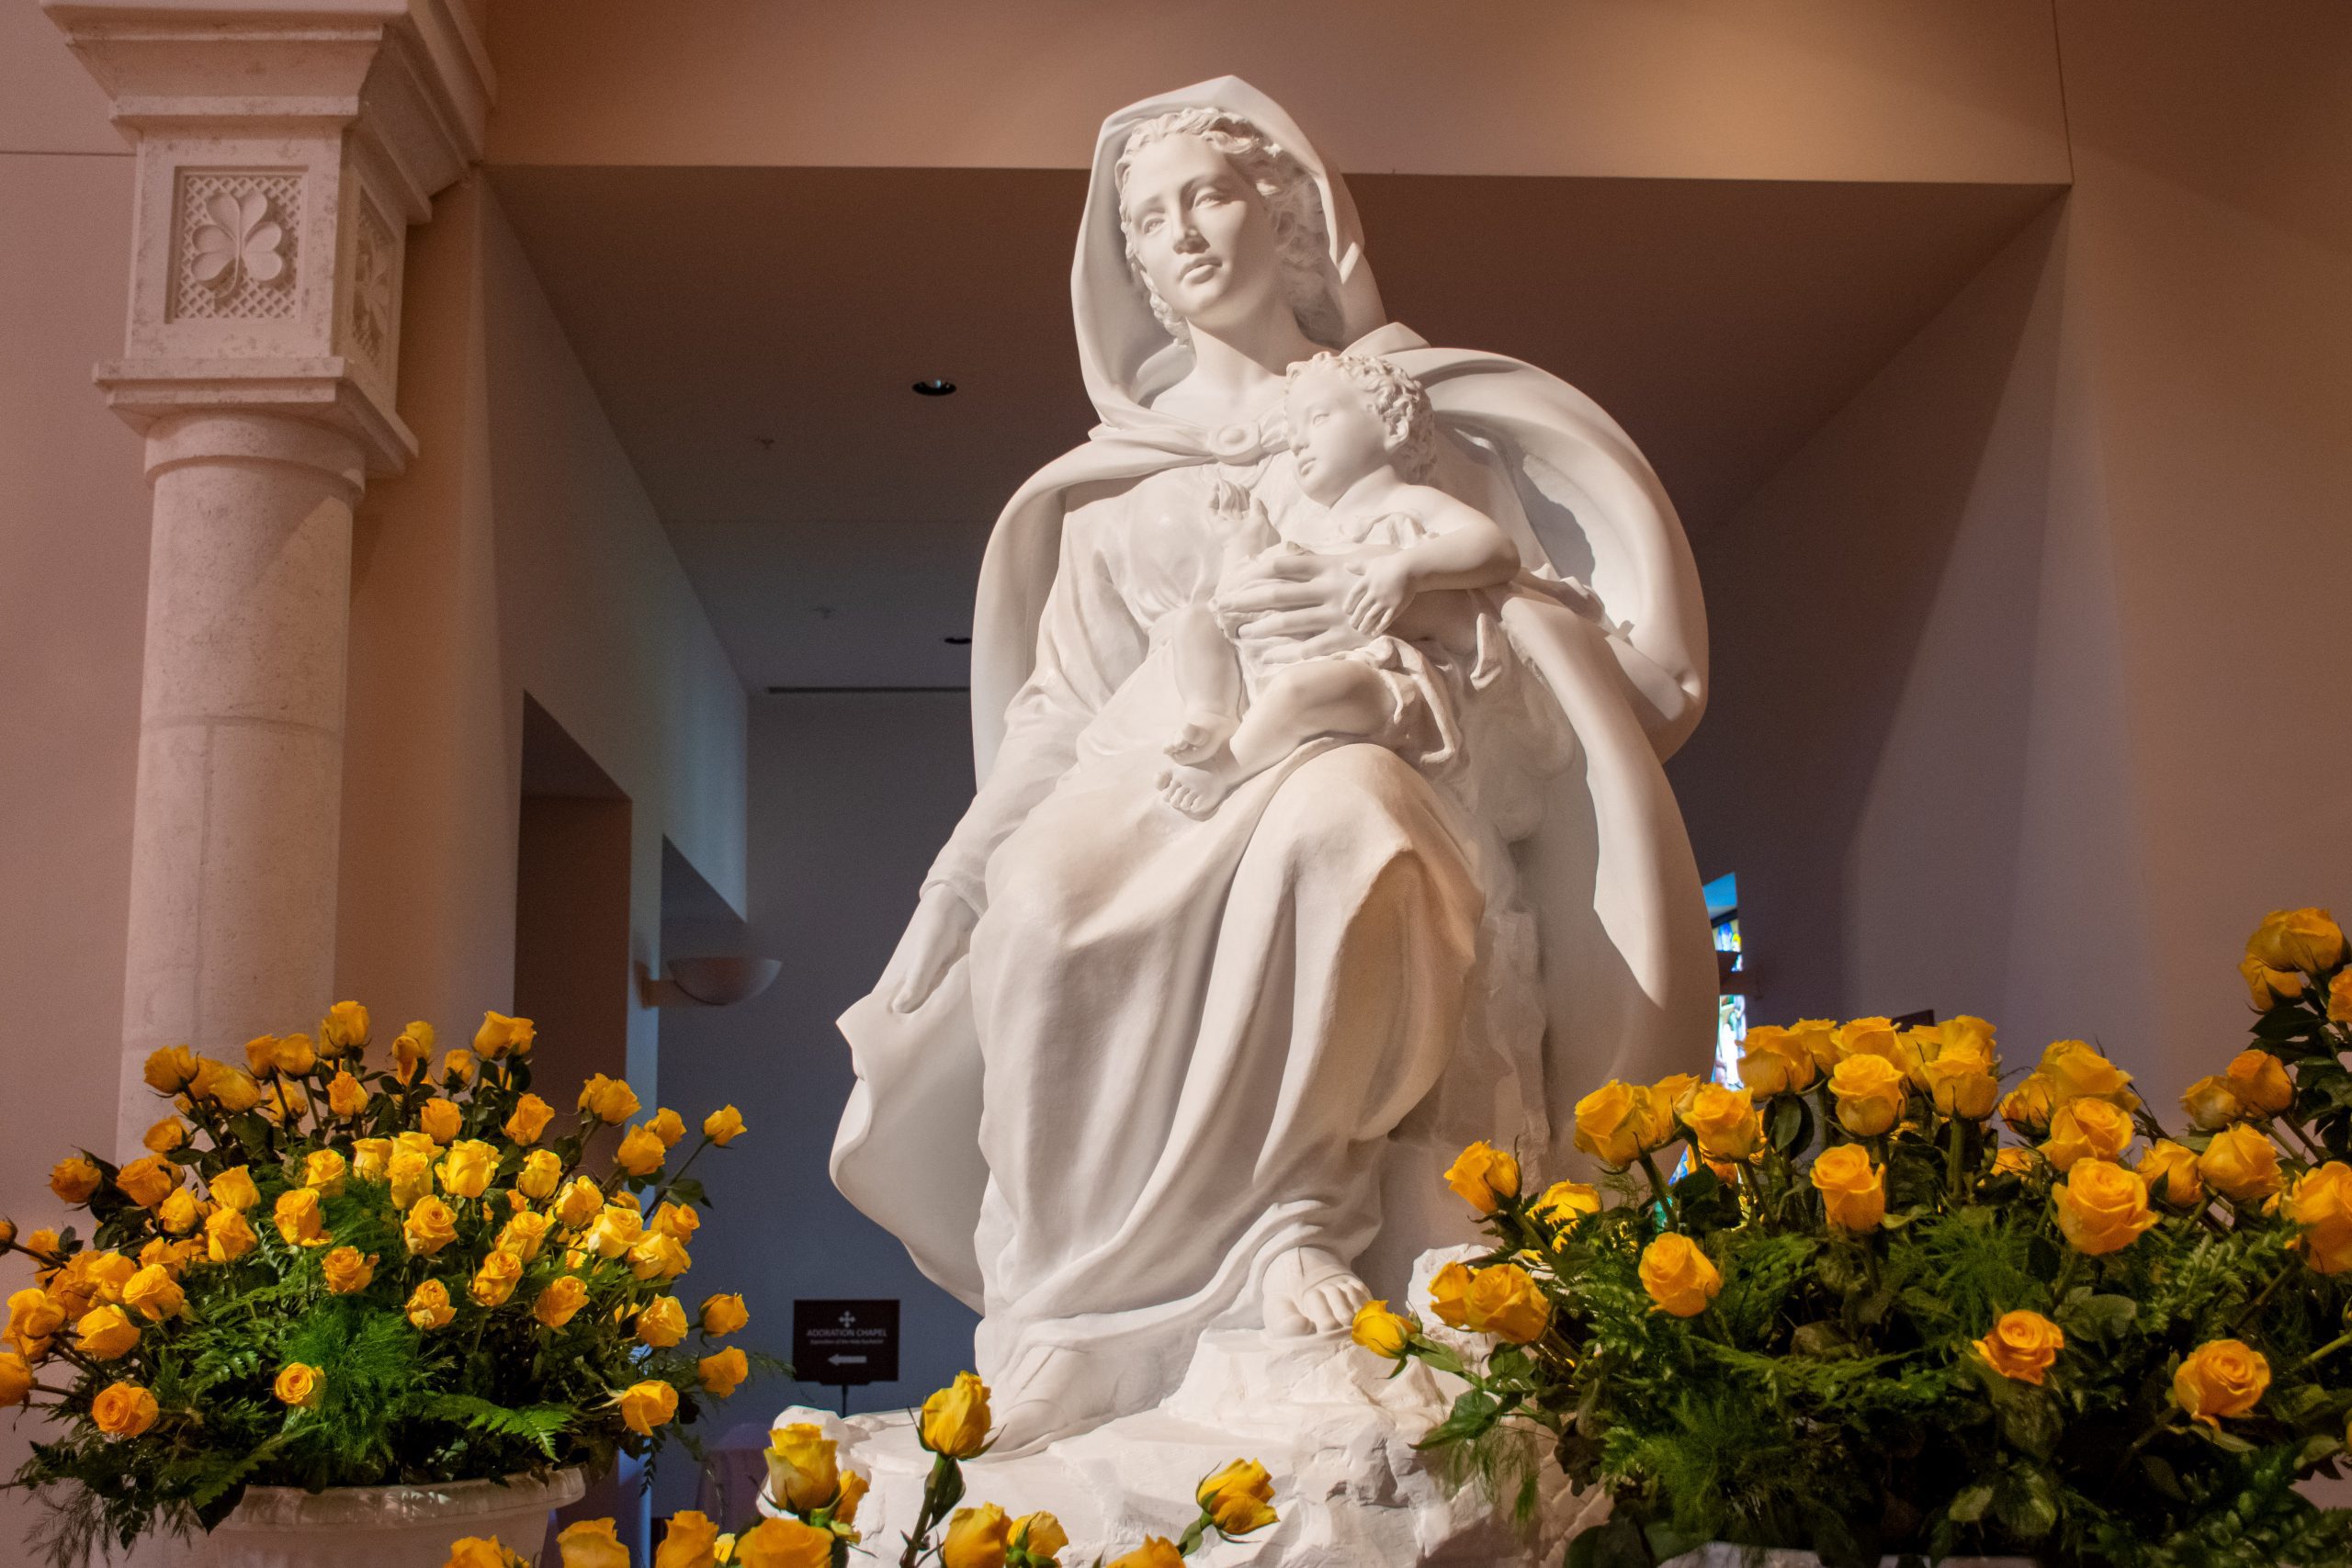 Mary’s Shrine: 25 years and the dream continues